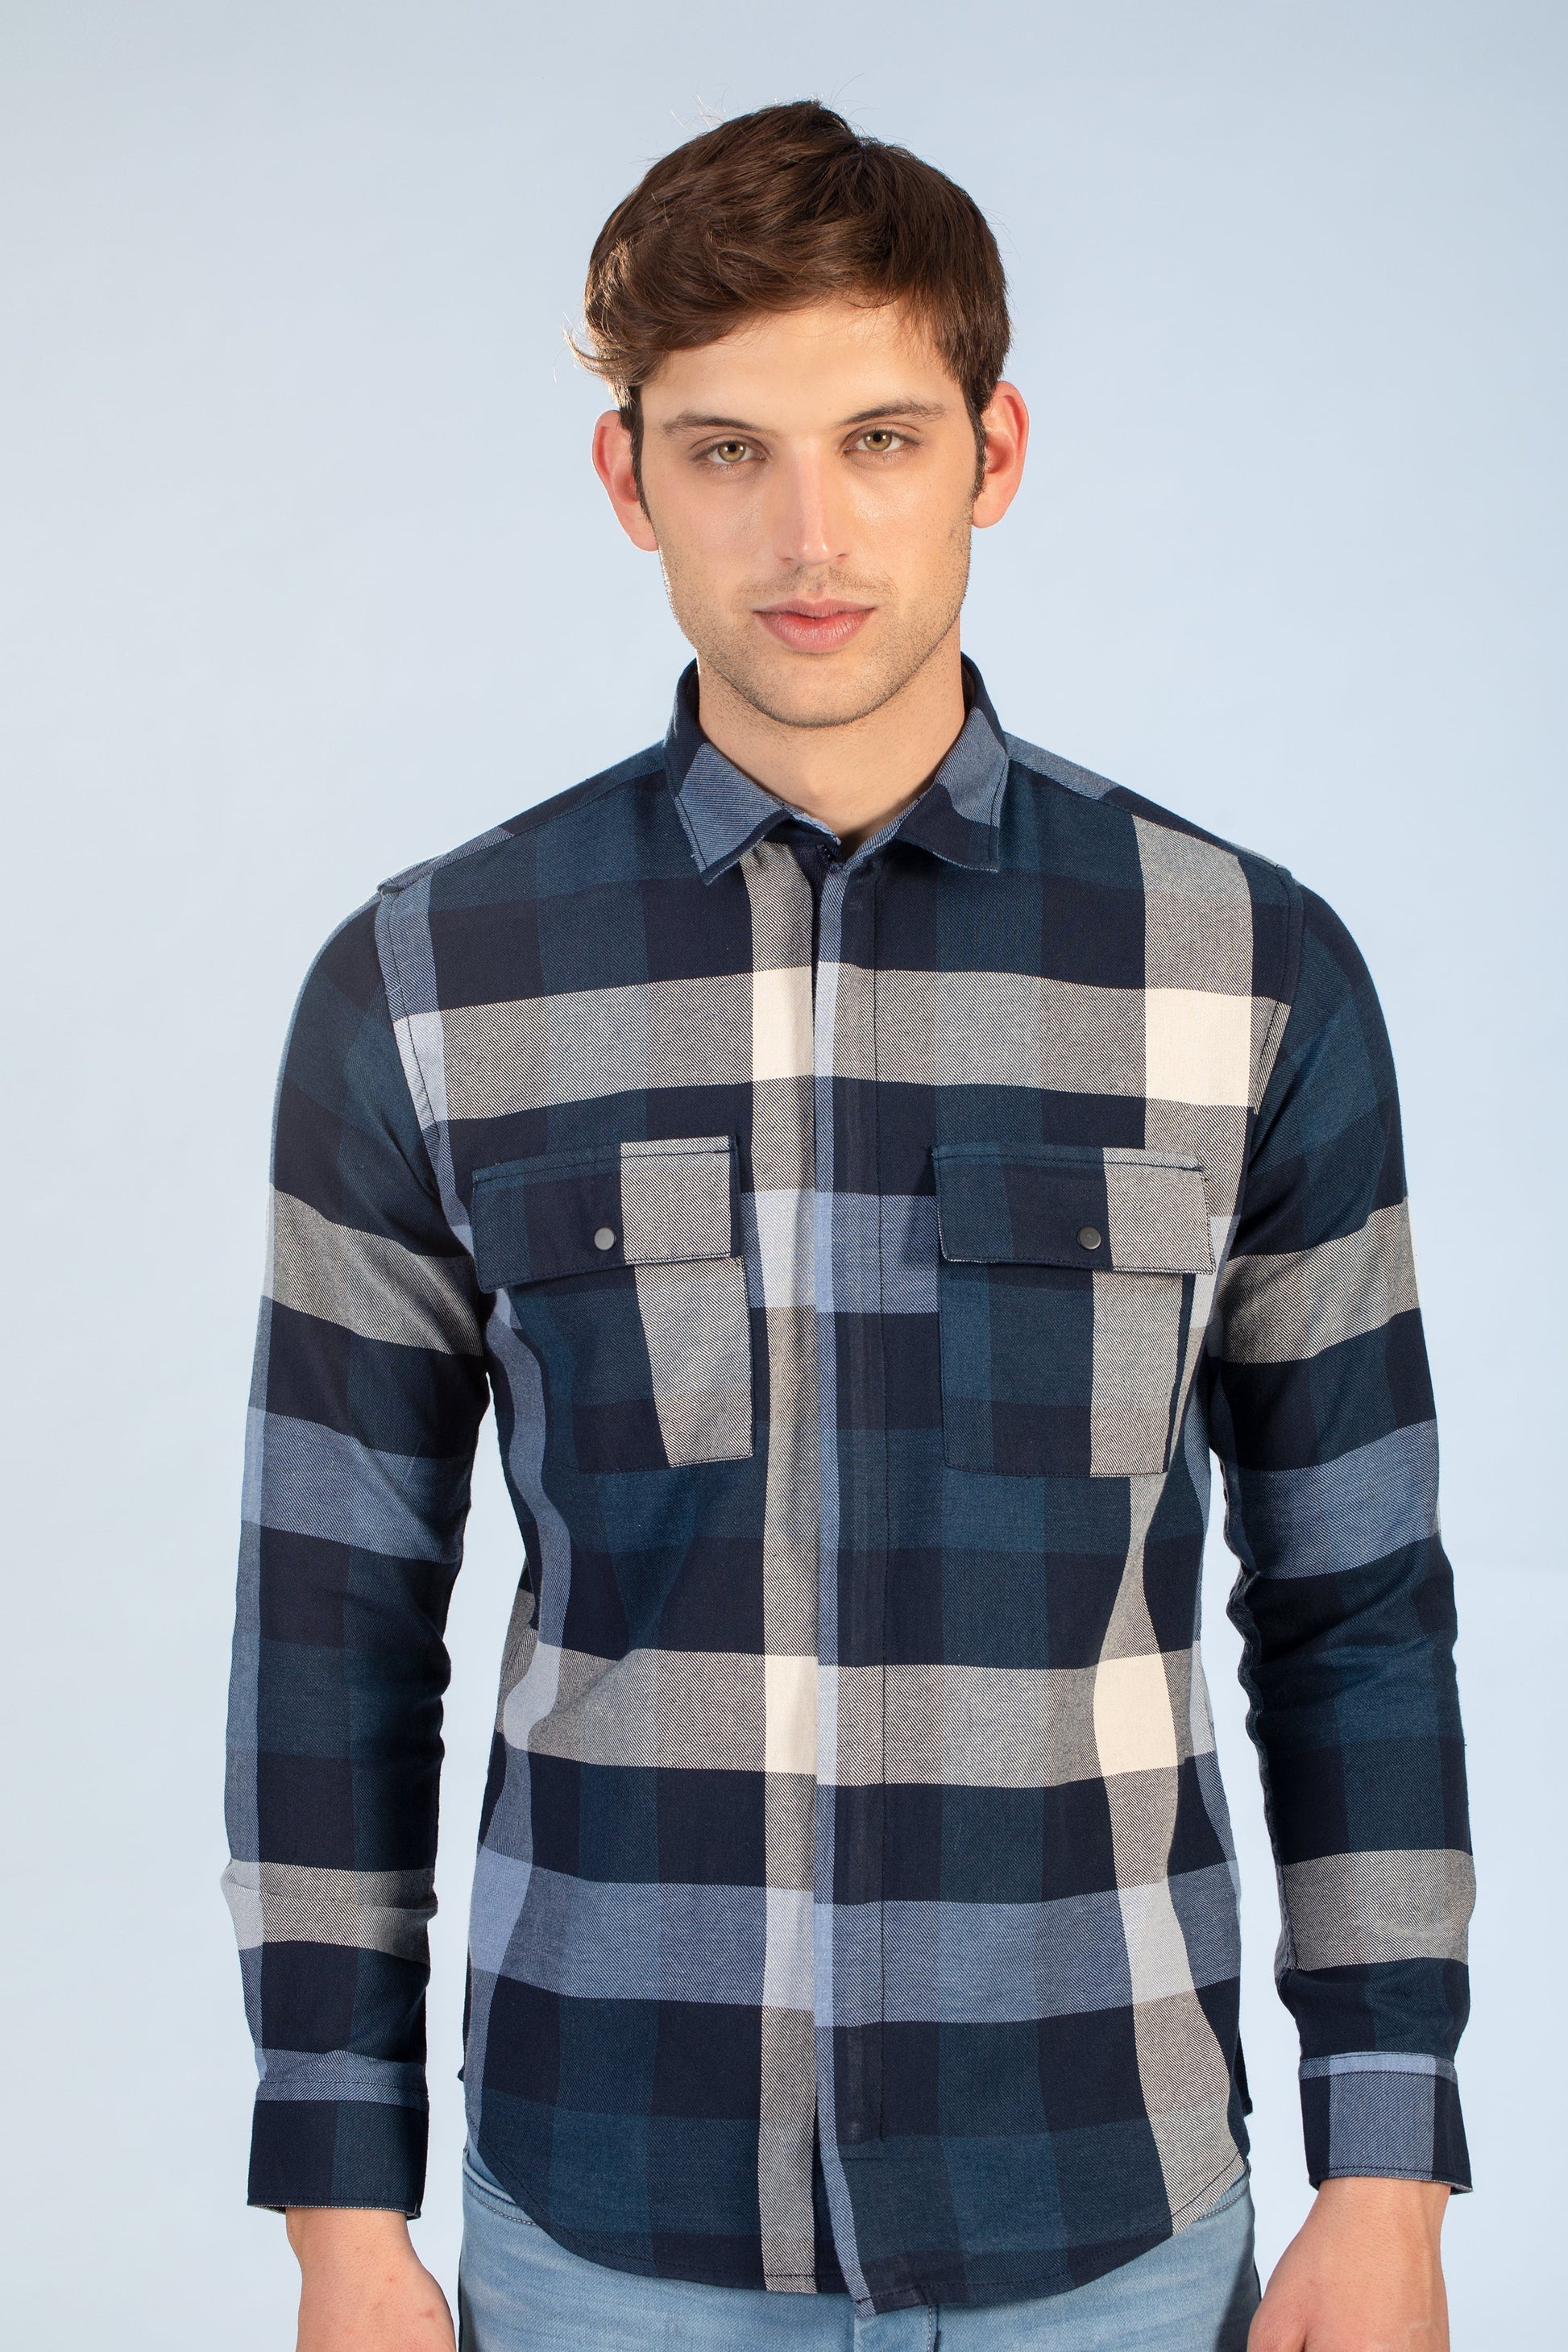 Buy Brushed Twill Flannel Plaid Shirt Online.